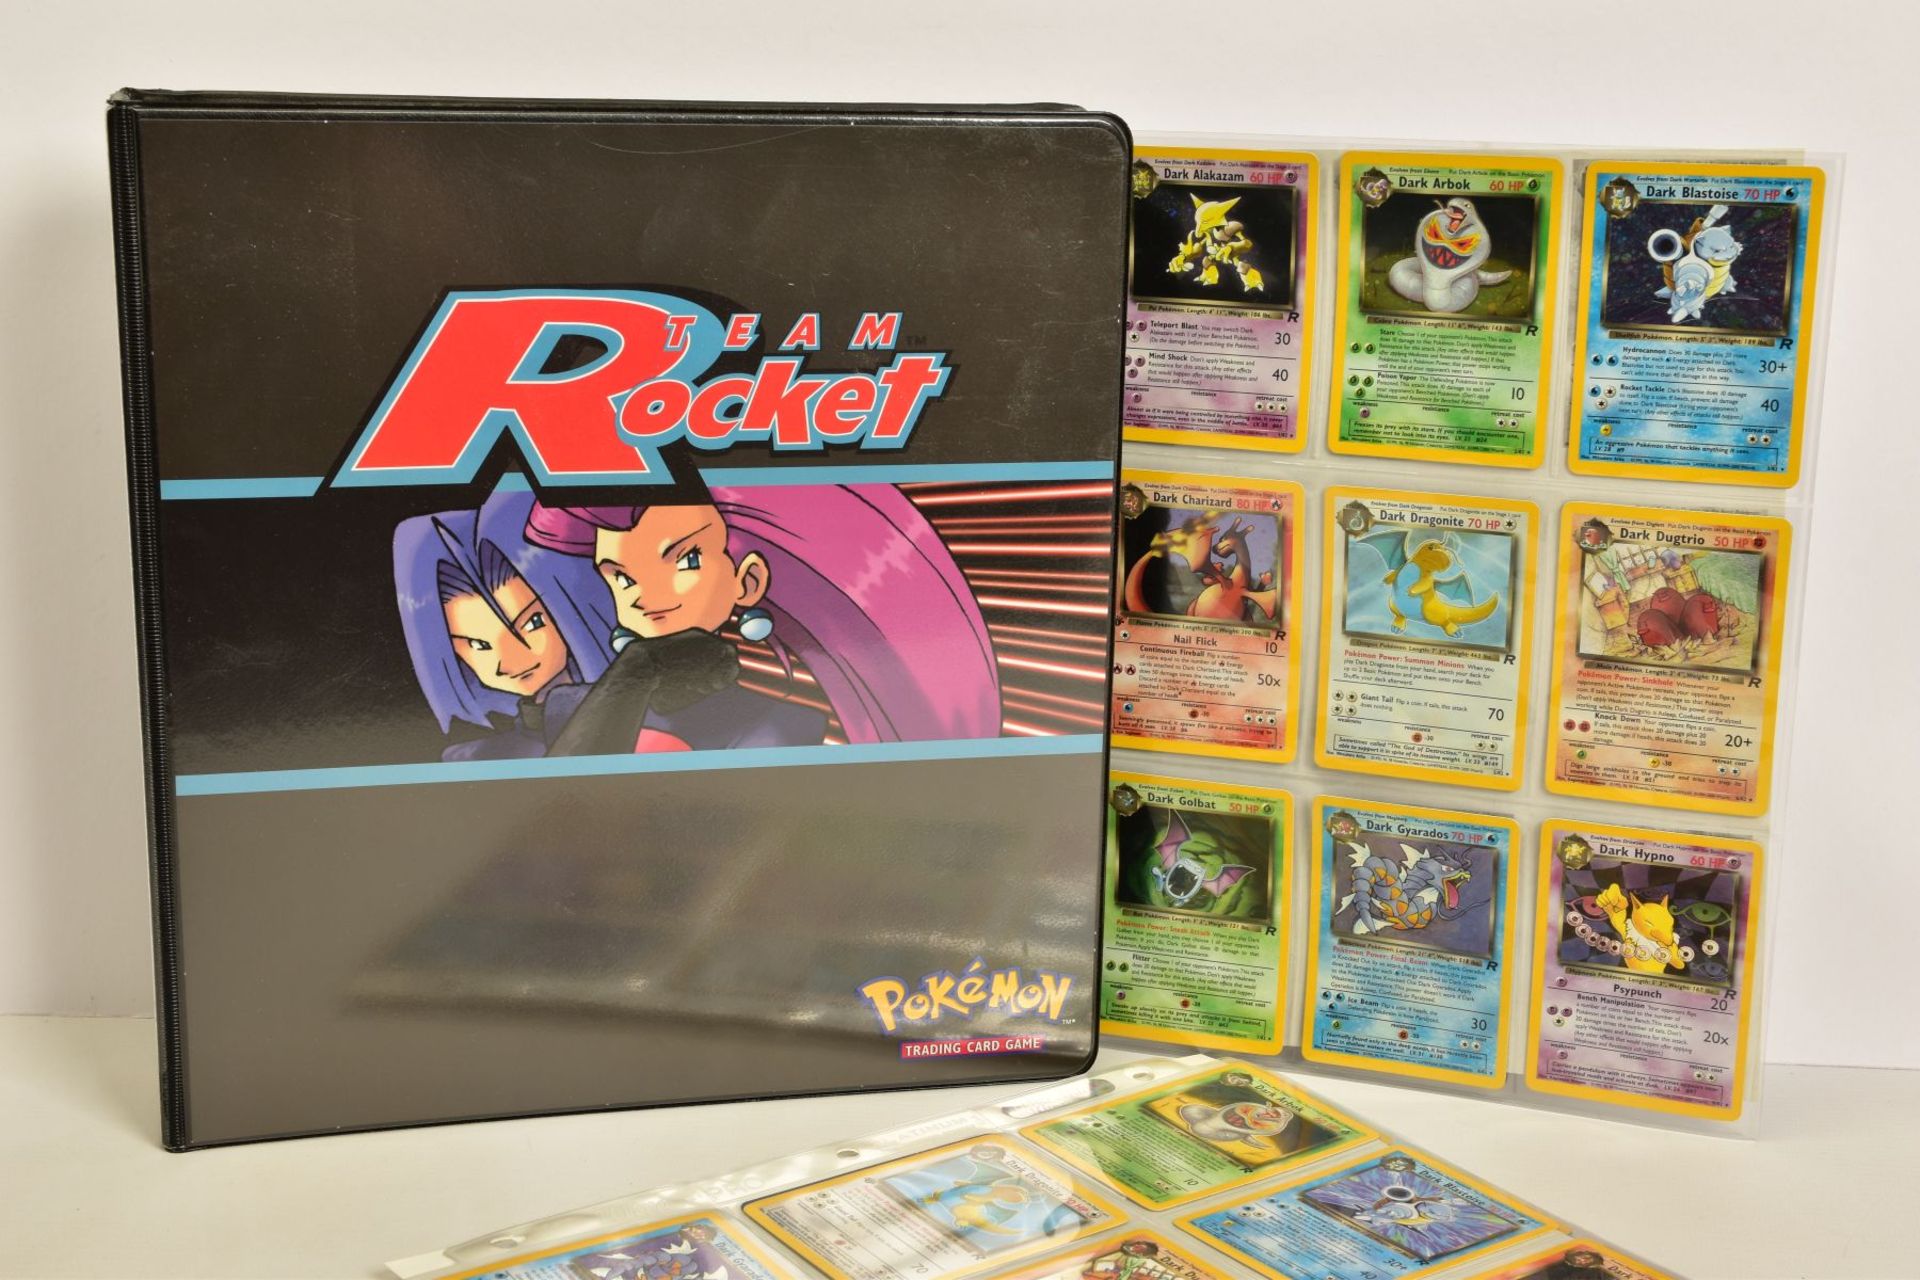 A COMPLETE POKEMON TEAM ROCKET SET, BASE SET 2 SET AND A QUANTITY OF GYM HEROES AND GYM CHALLENGE